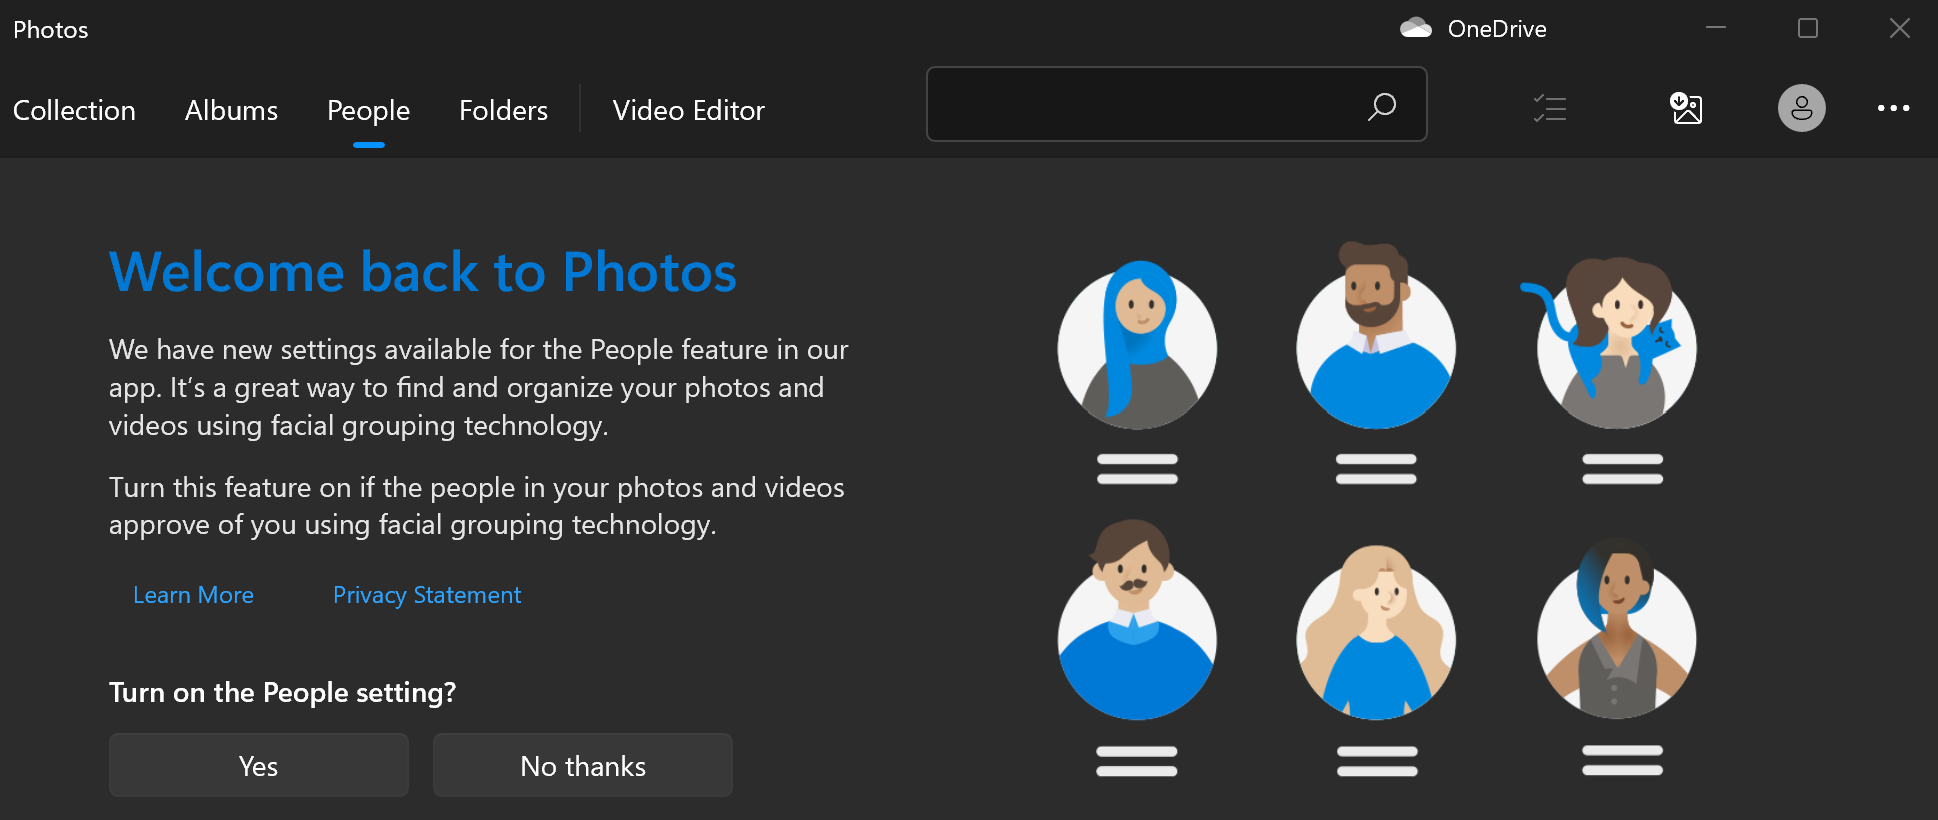 Shows the welcome screen for photos with yes and no buttons after a question about turning on the People setting.